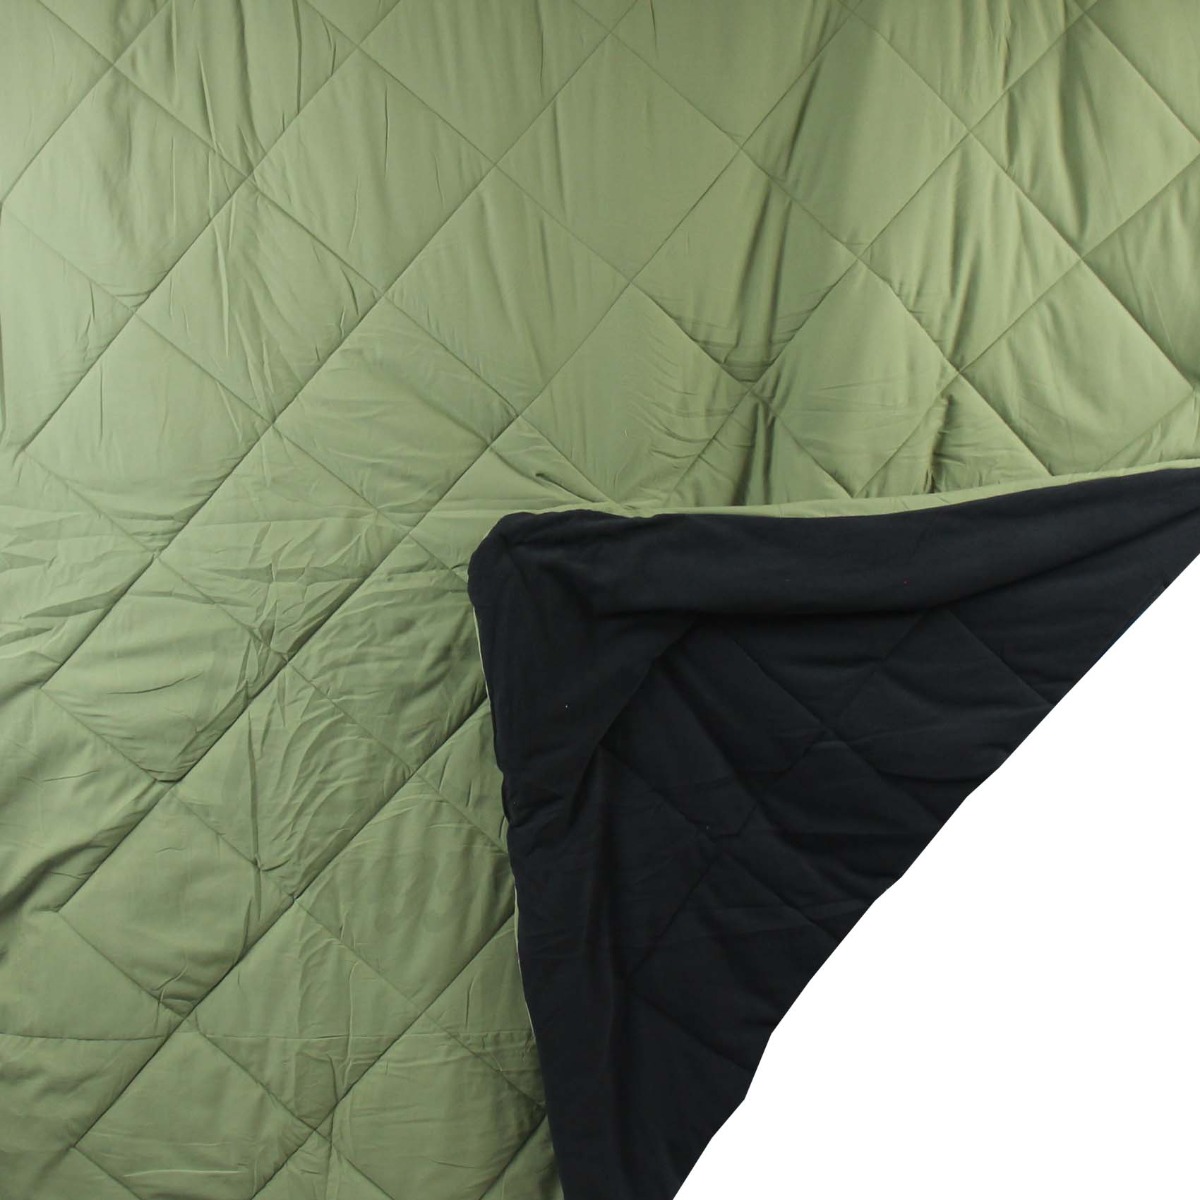 HI-COUNTRY RUGGED EXTREME BLANKET OLIVE GREEN